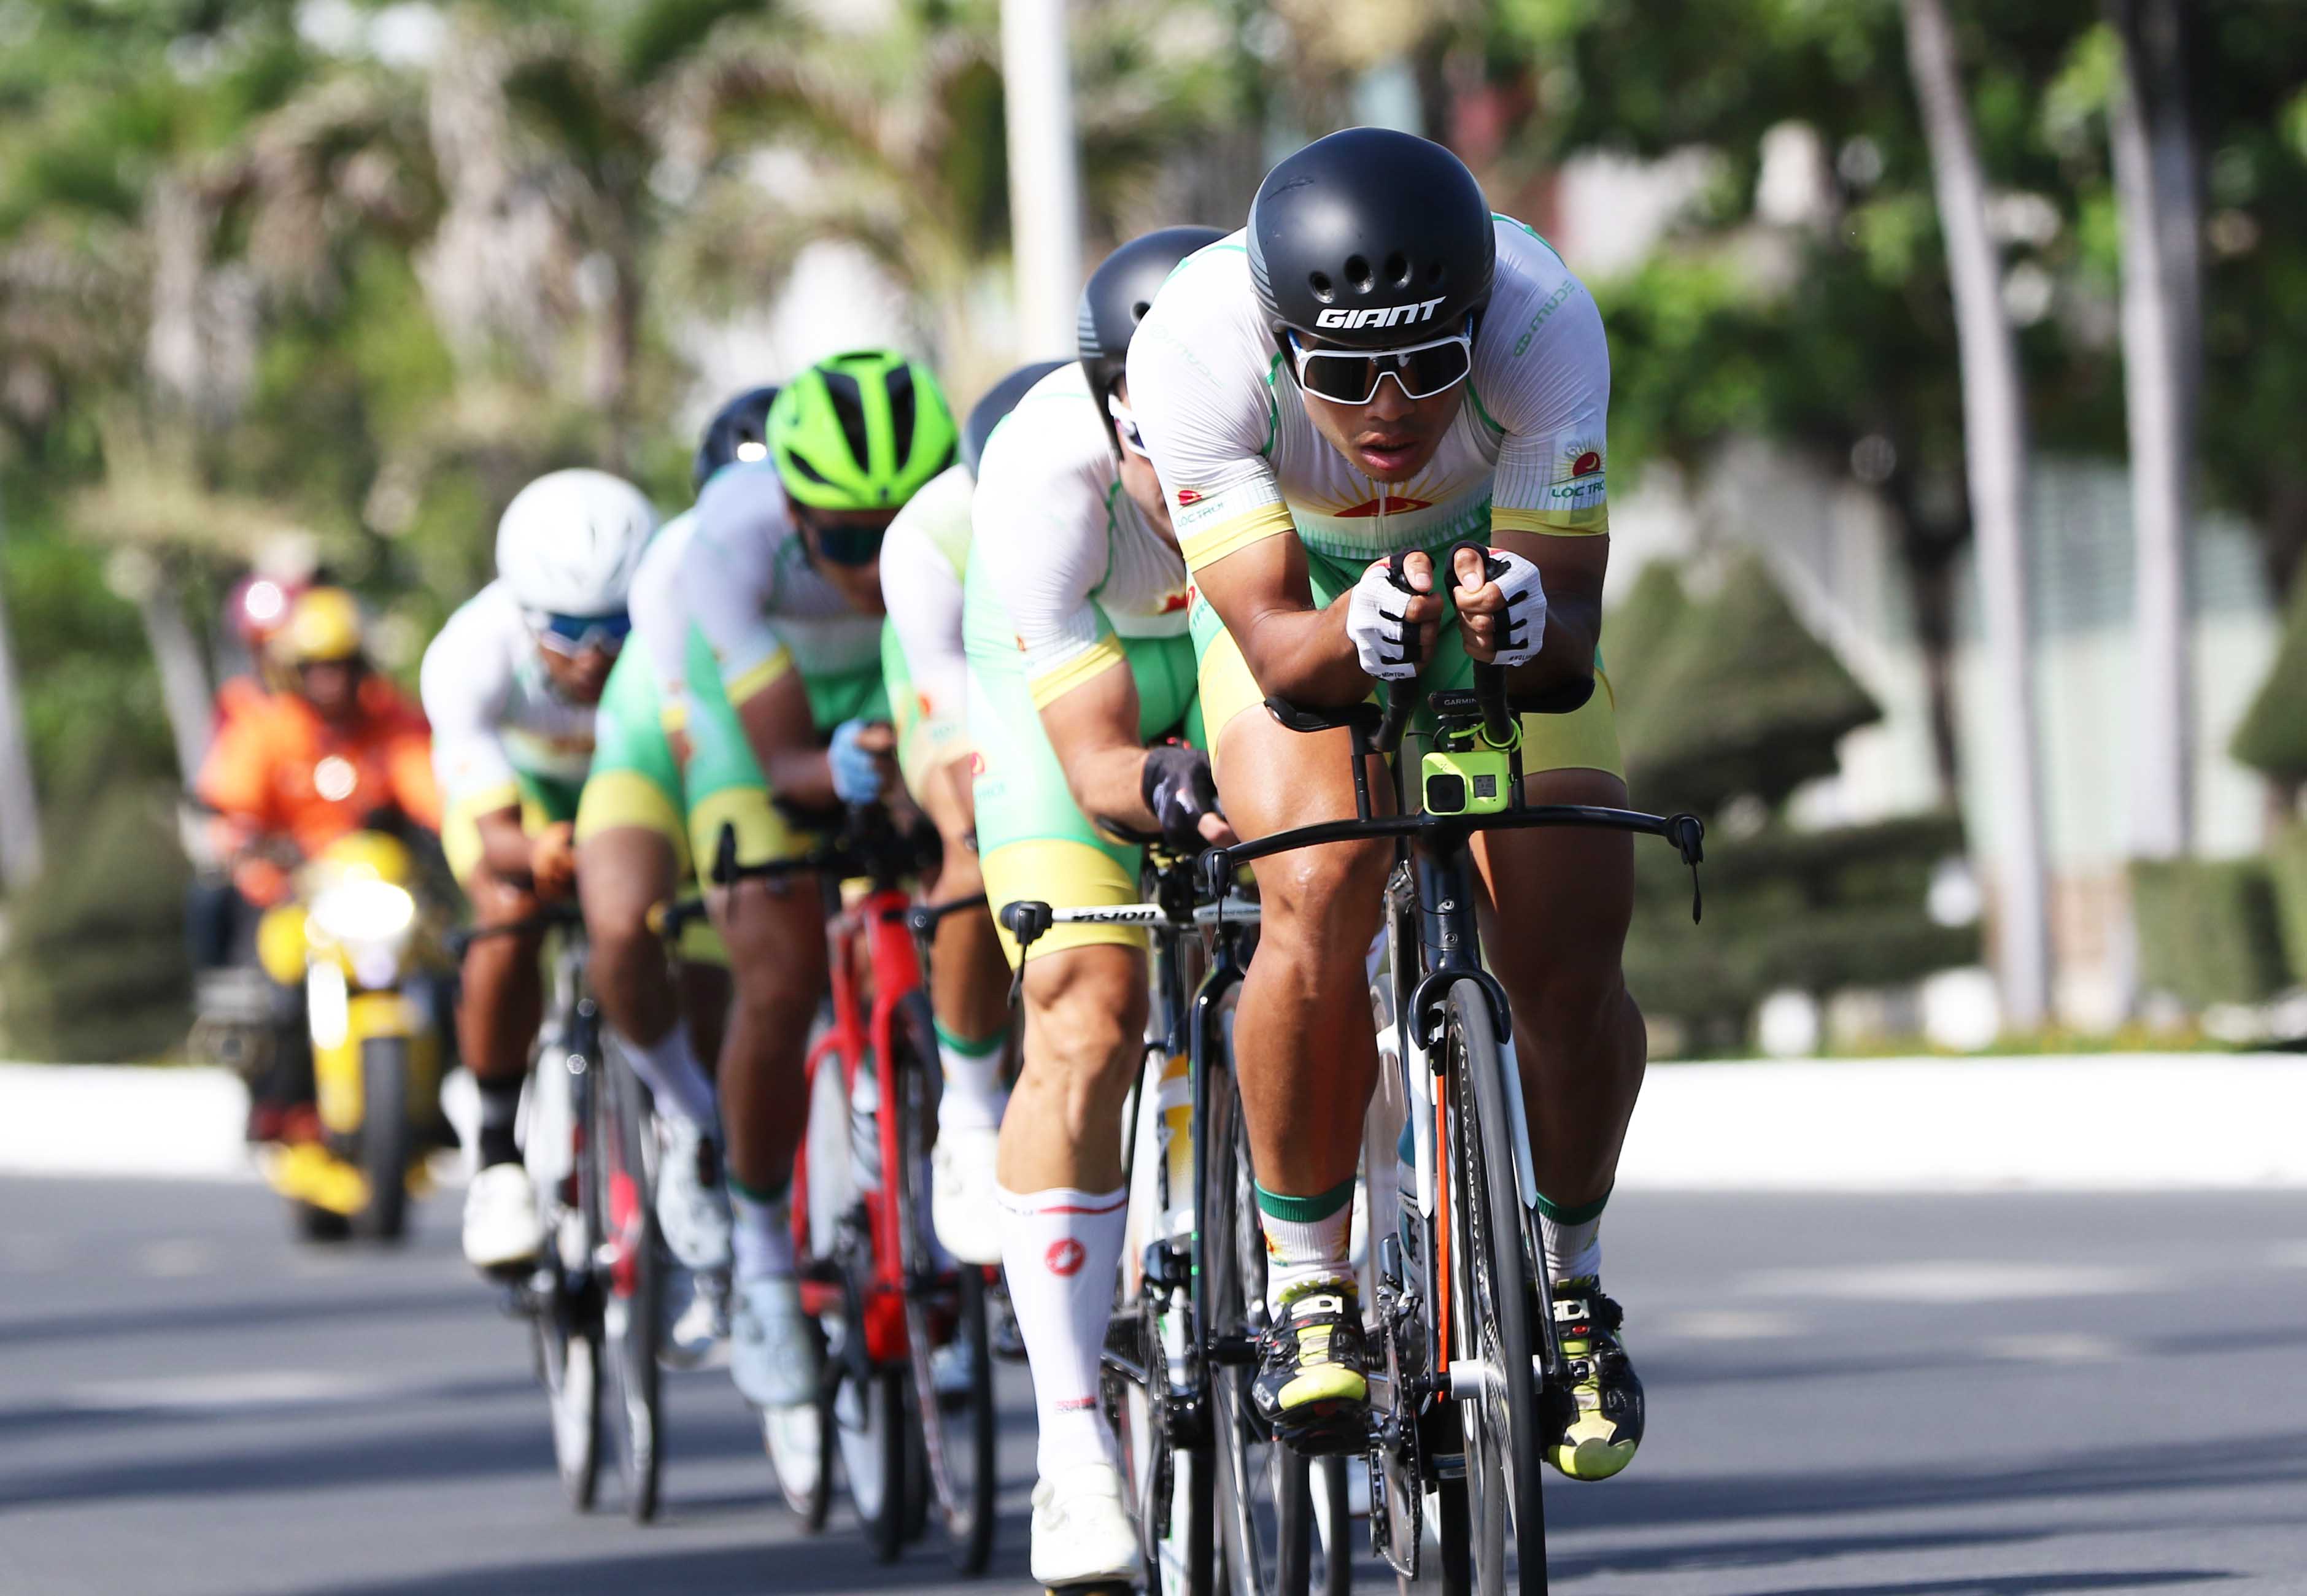 Southern team wins team time trial at Vietnam’s national cycling race